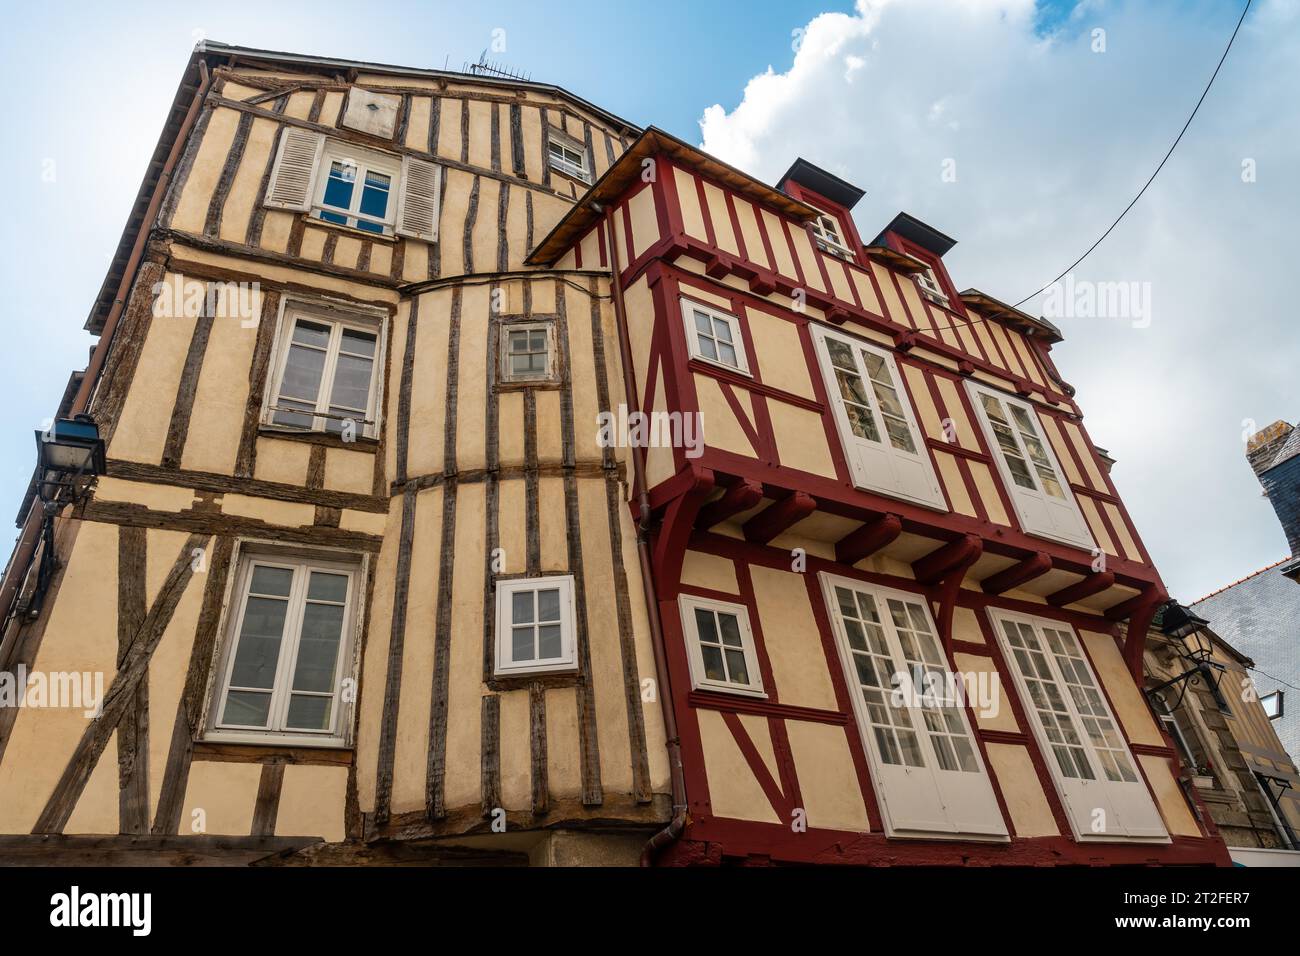 Vannes coastal medieval town, traditional colored wooden houses, Morbihan department, Brittany, France Stock Photo